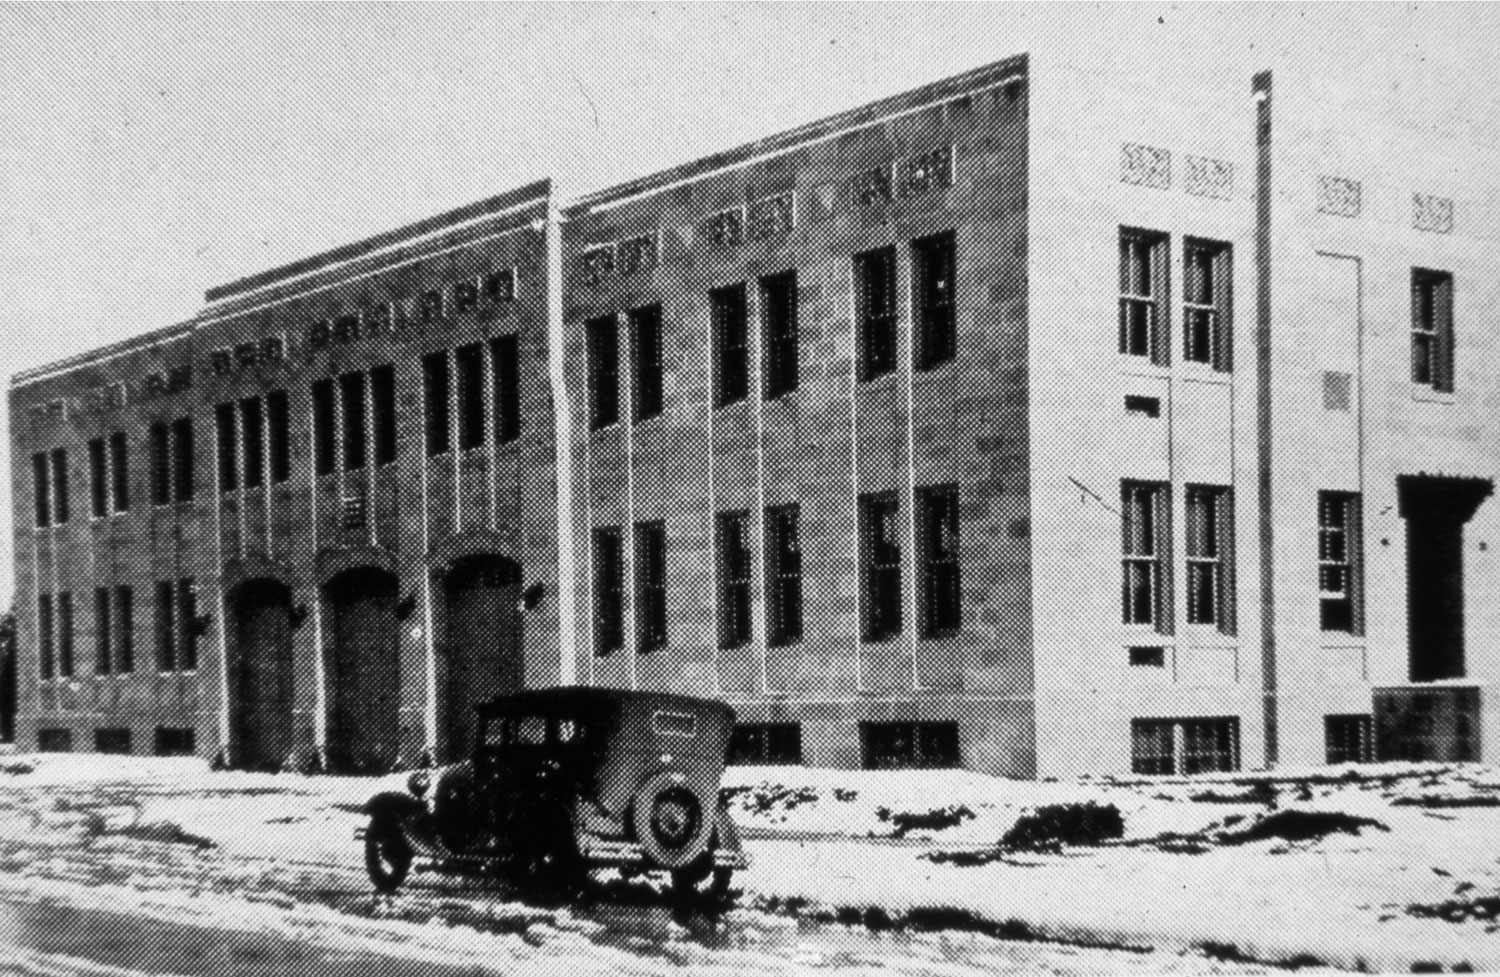 Bryan Municipal Building in the 1930s.